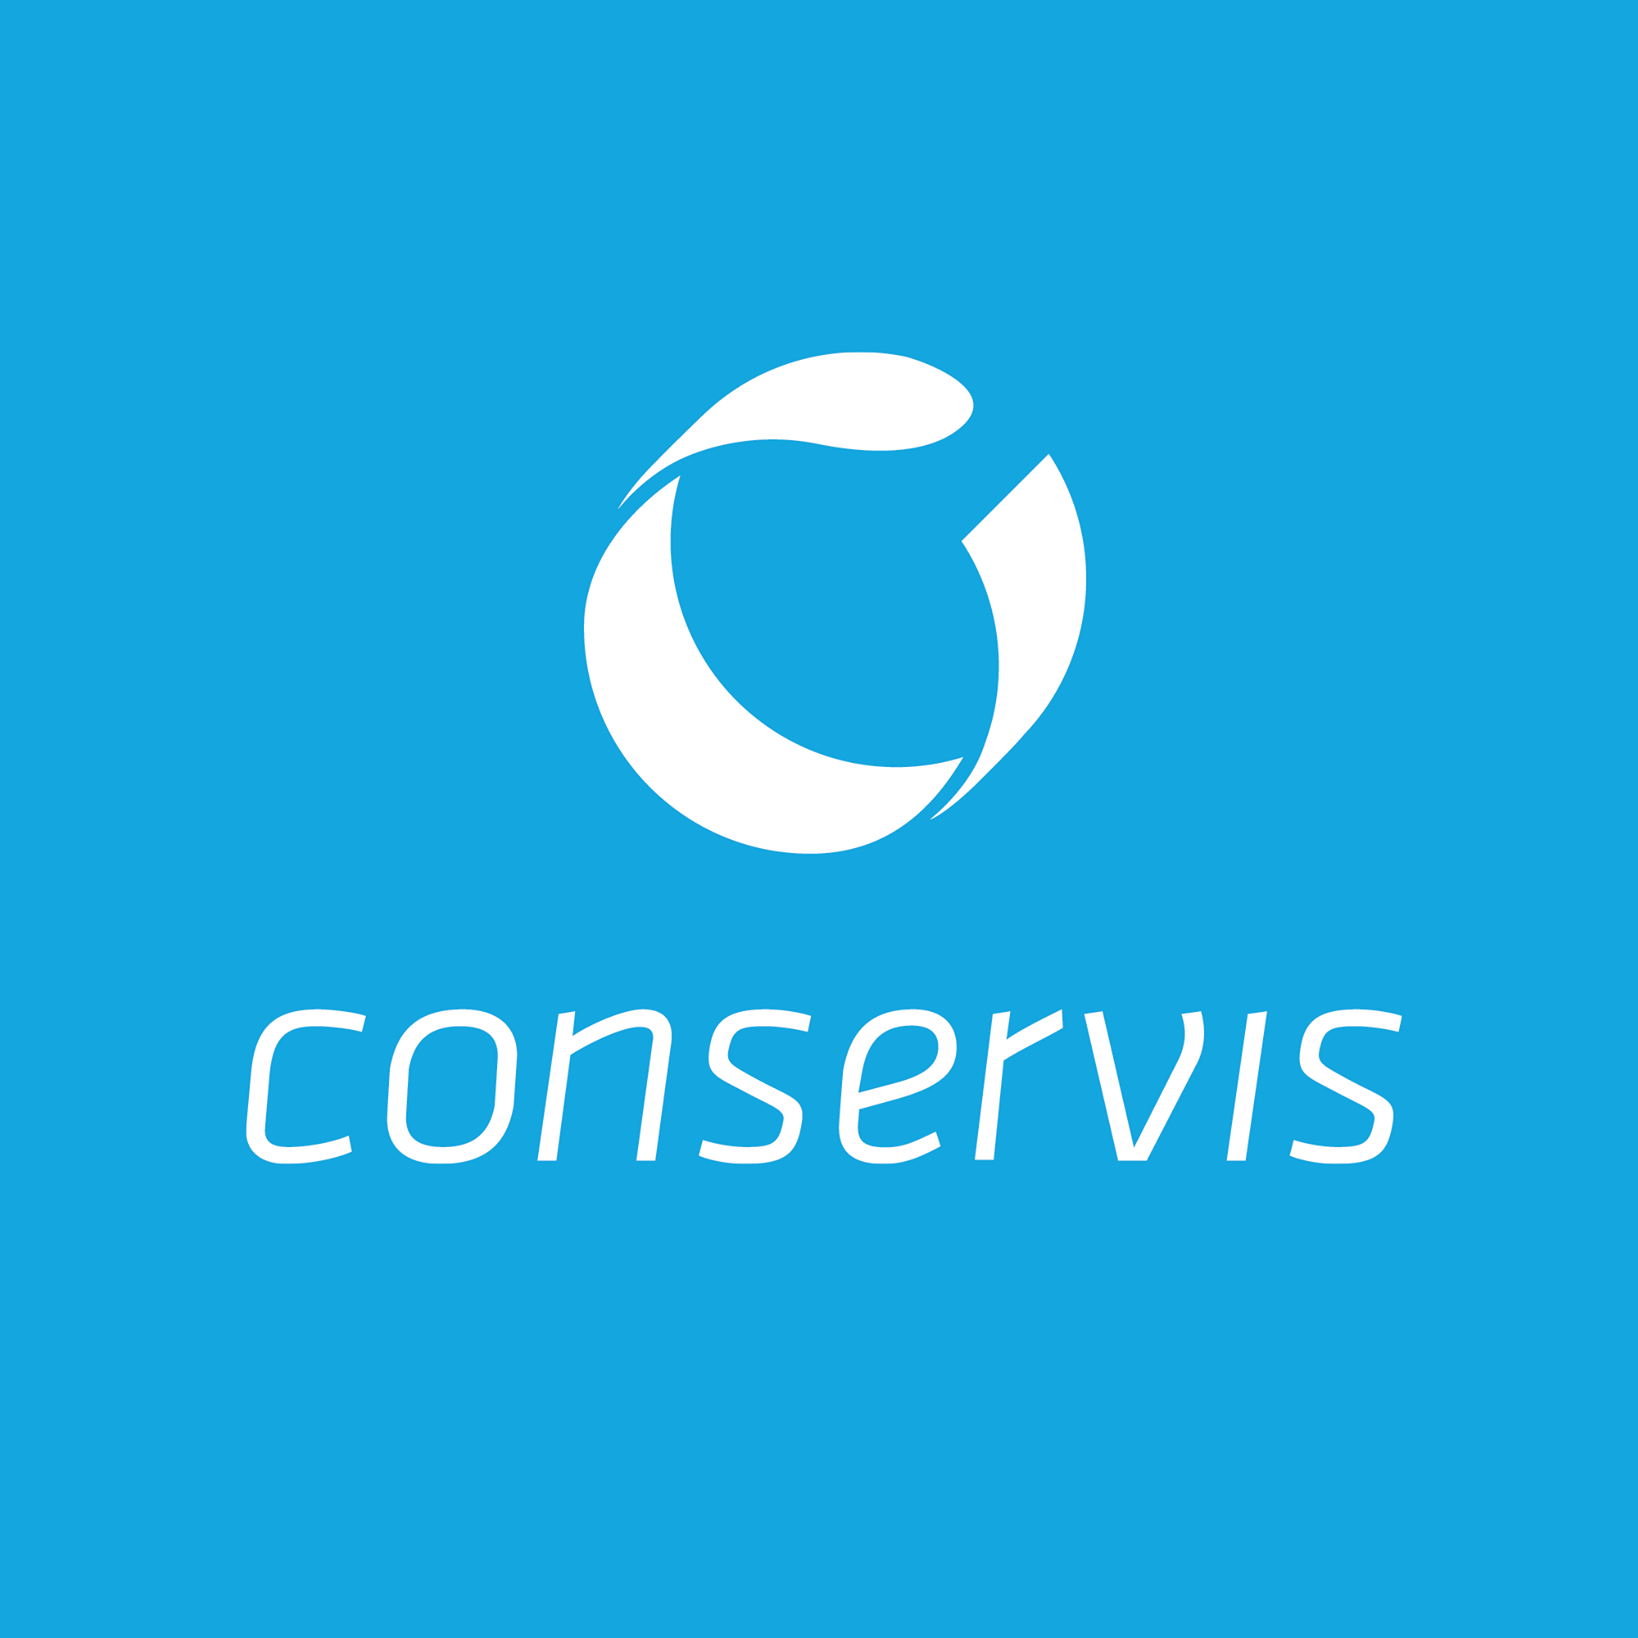 Business logo of Conservis